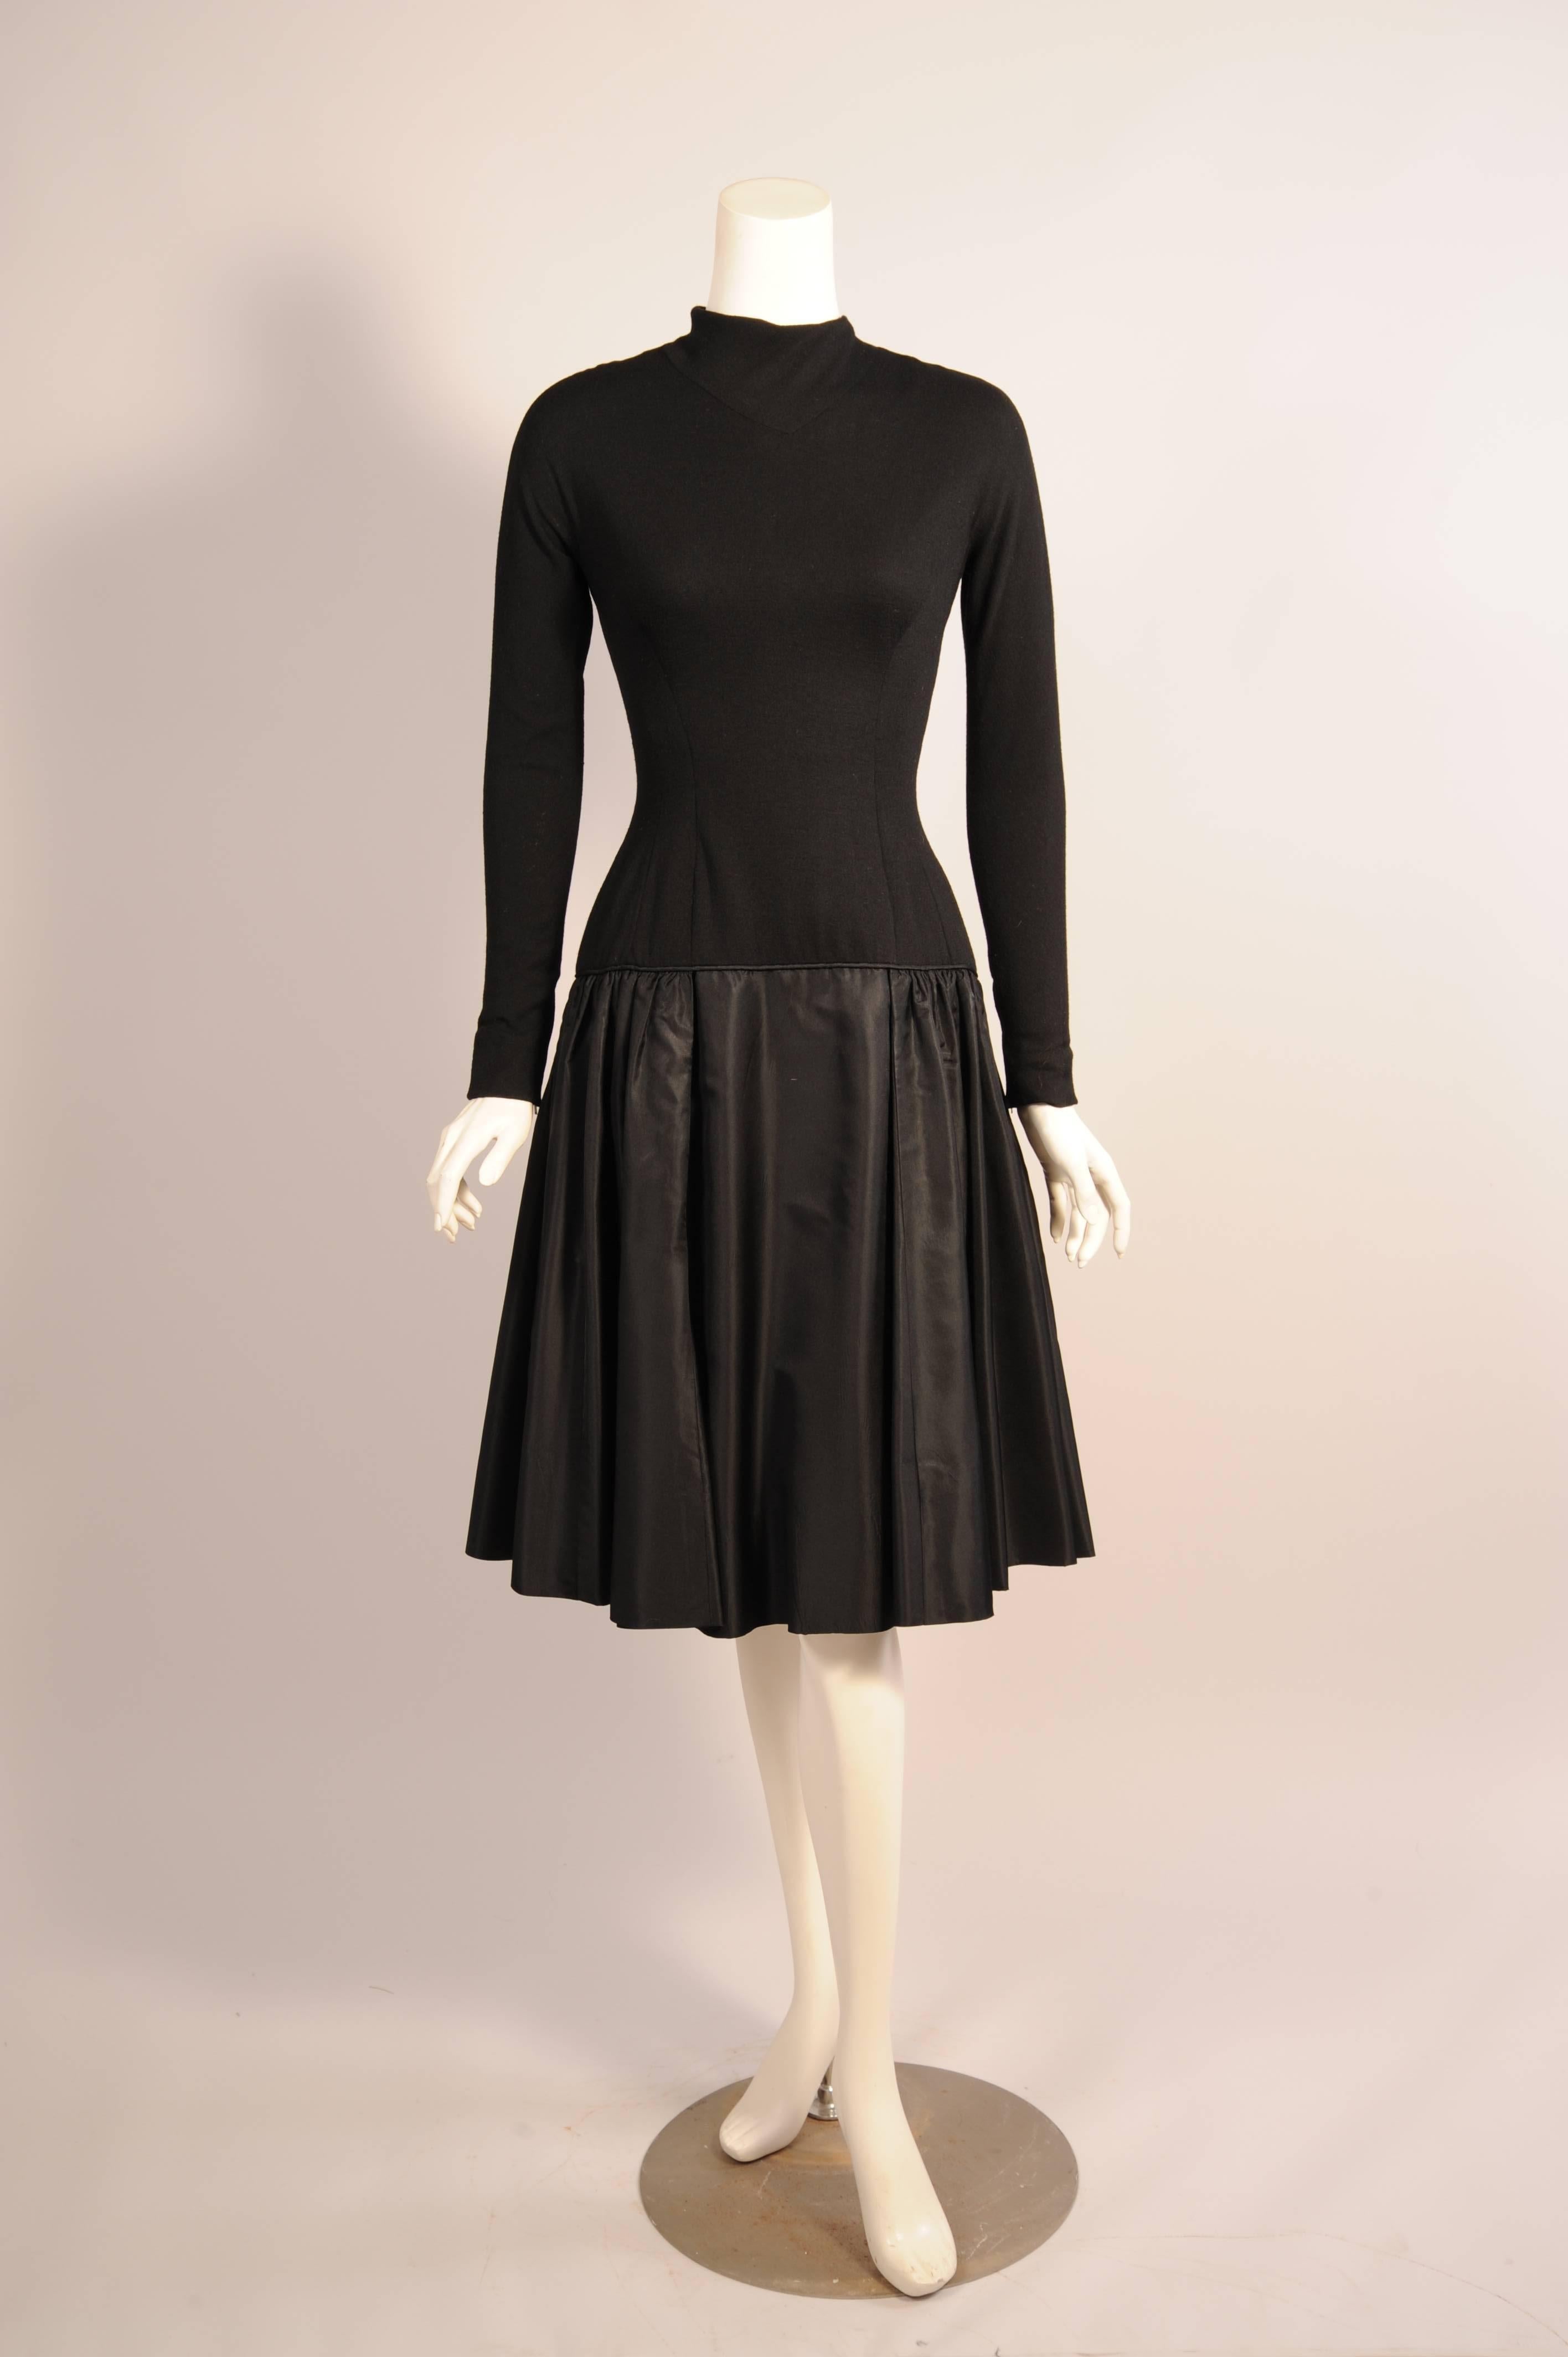 This chic little black dress comes from the estate of a lady who wore couture. Sadly there is no label in this piece. The anonymous designer used black wool jersey for the elongated bodice. It has a mock turtleneck, long sleeves with little zippers